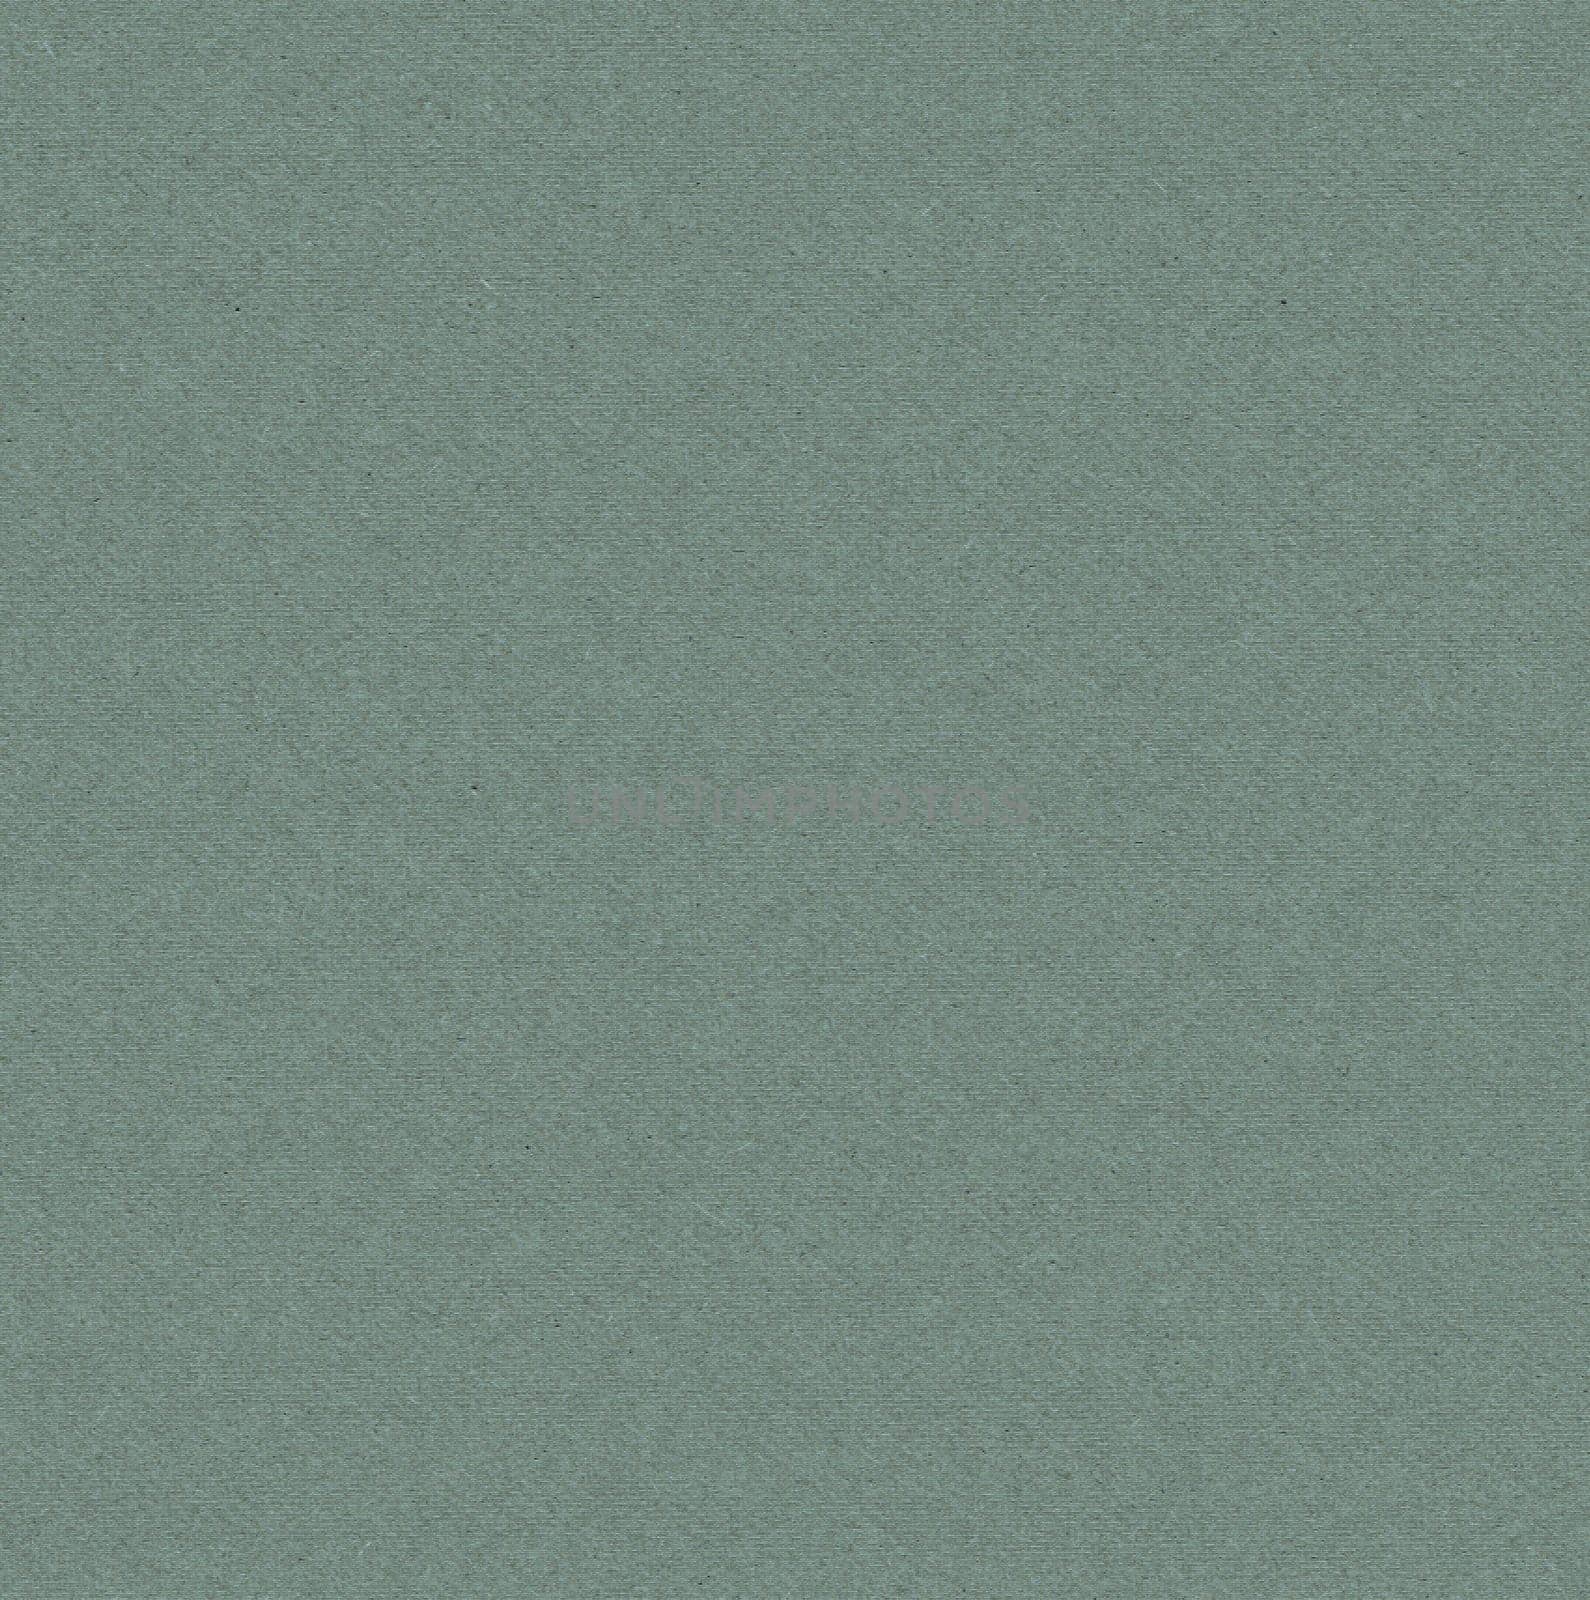 The texture of the background is dark green with a rough and embossed surface